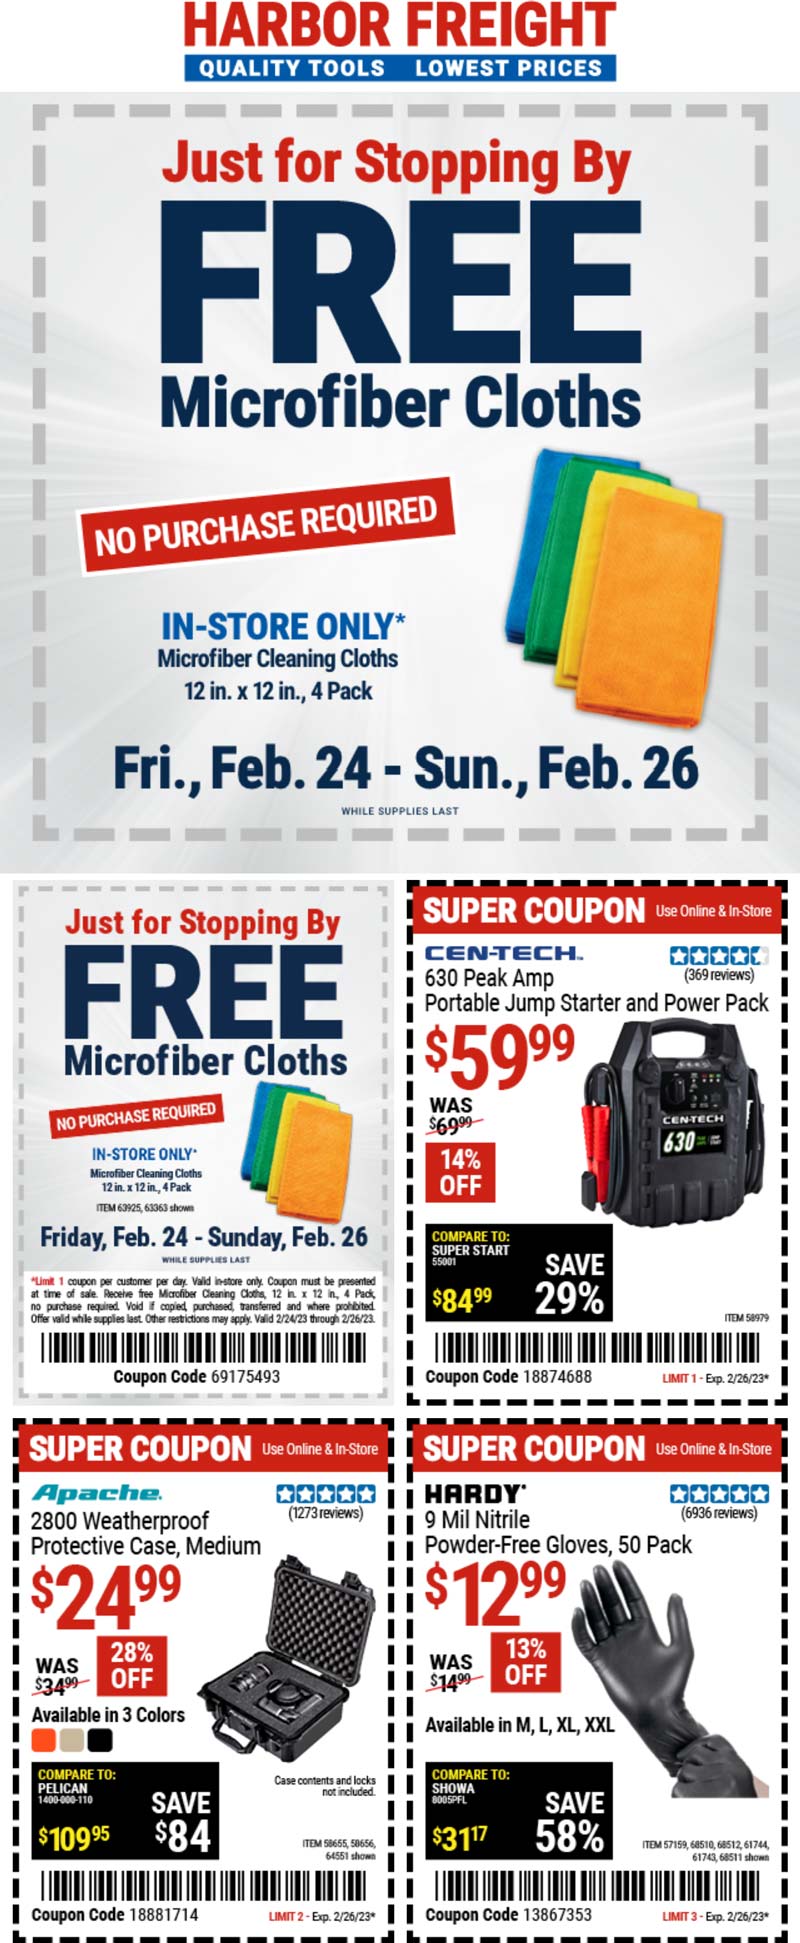 Harbor Freight stores Coupon  Free microfiber cloths at Harbor Freight Tools, no purchase necessary #harborfreight 